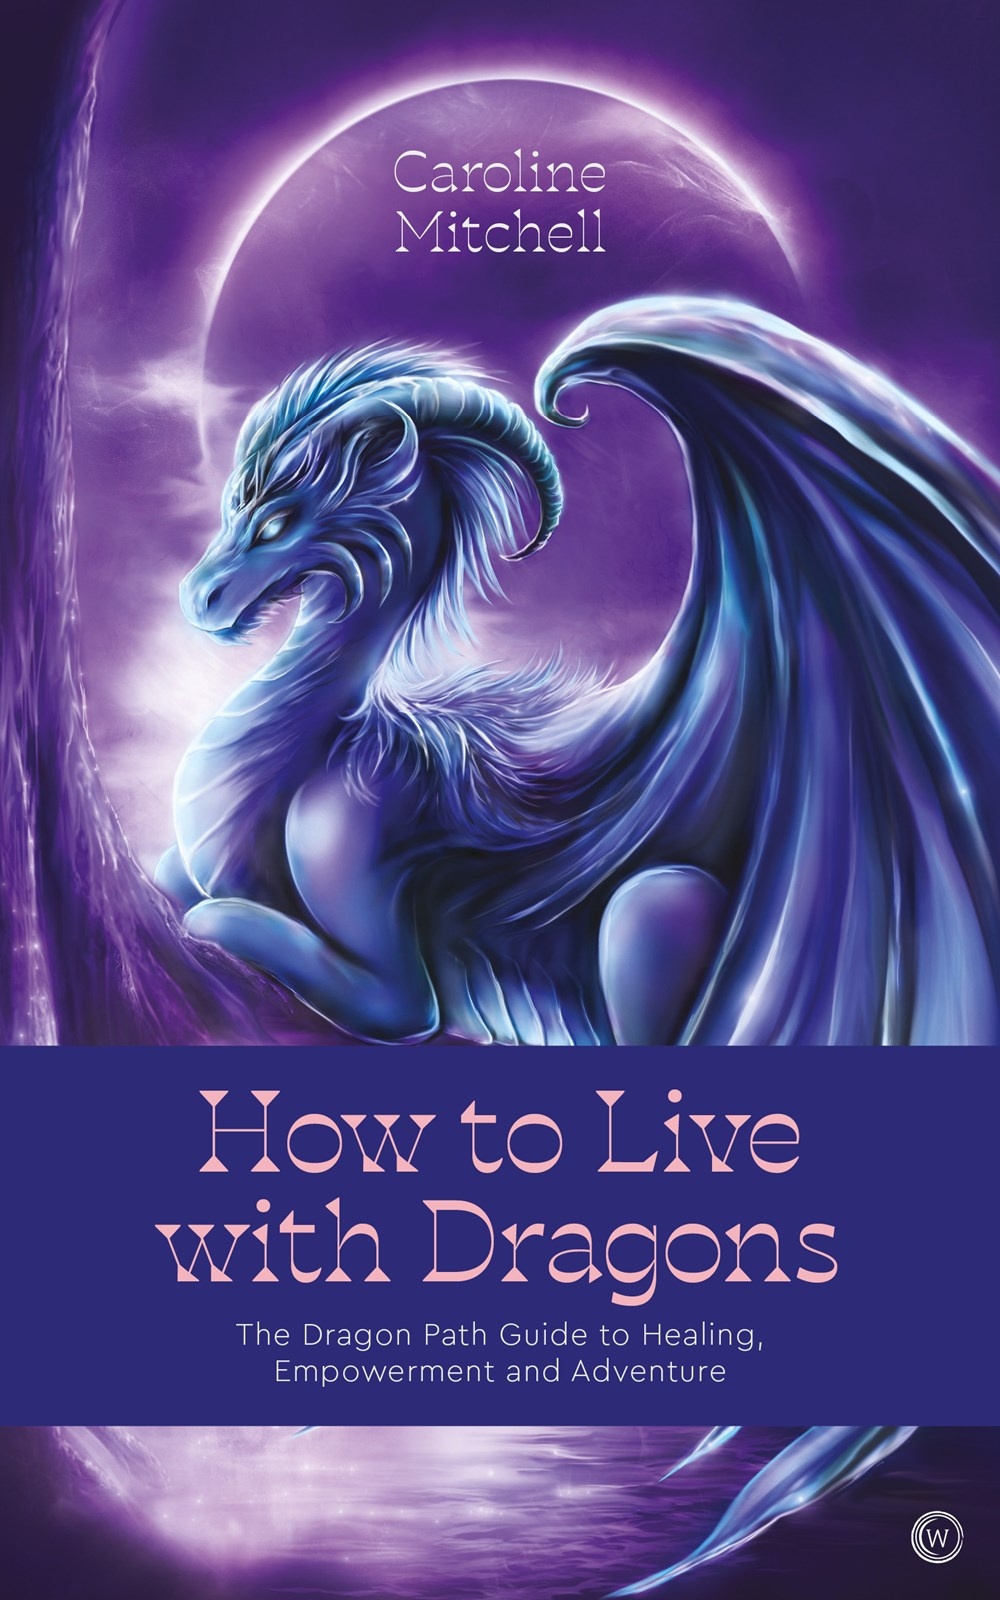 How to Live with Dragons by Caroline Mitchell - Penguin Books